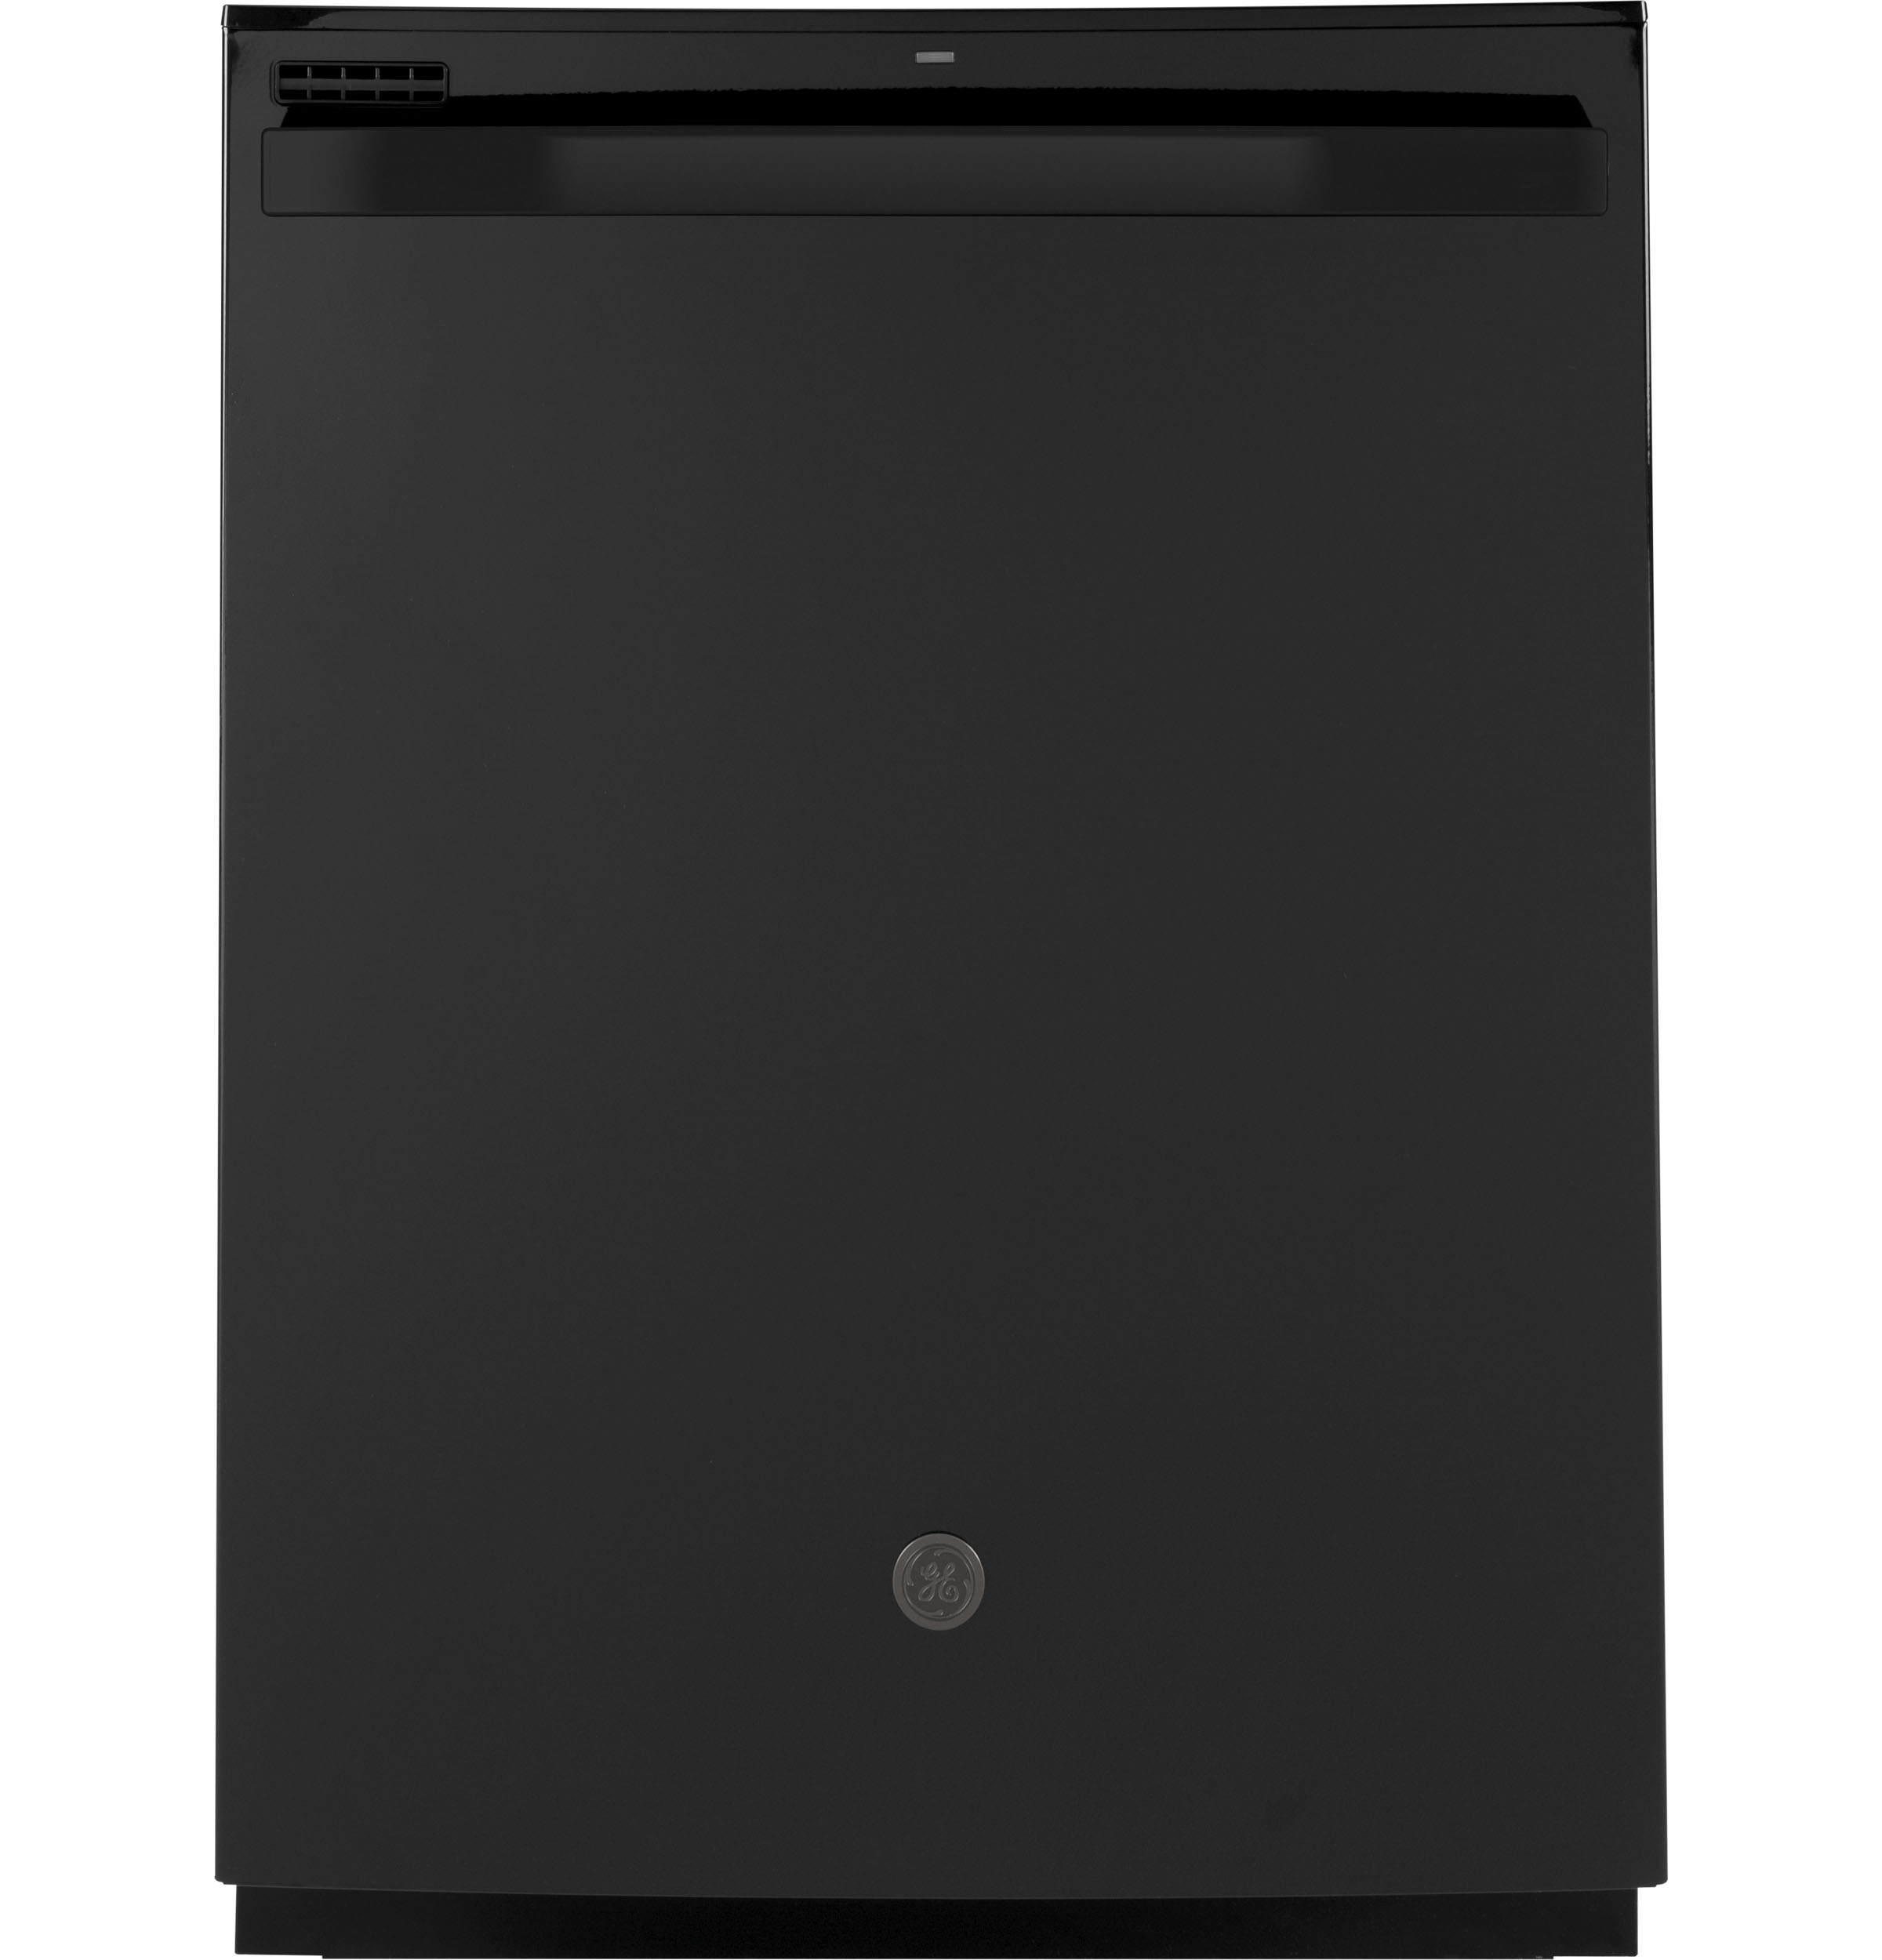 GE® ENERGY STAR® Top Control with Plastic Interior Dishwasher with Sanitize Cycle & Dry Boost